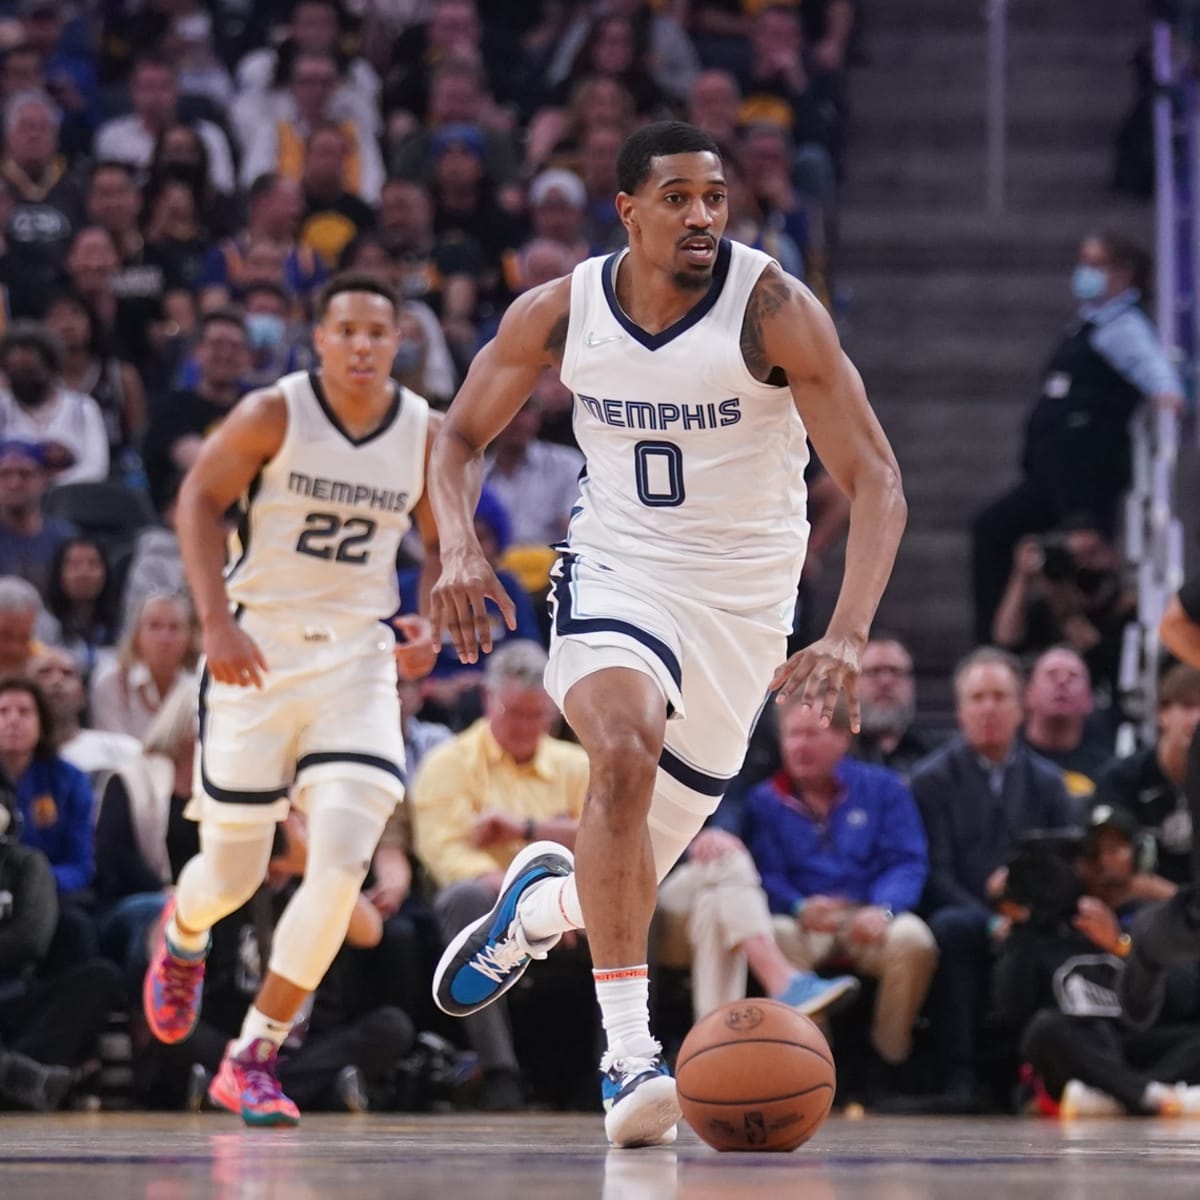 Phoenix Suns: De'Anthony Melton becomes starting point guard as rookie